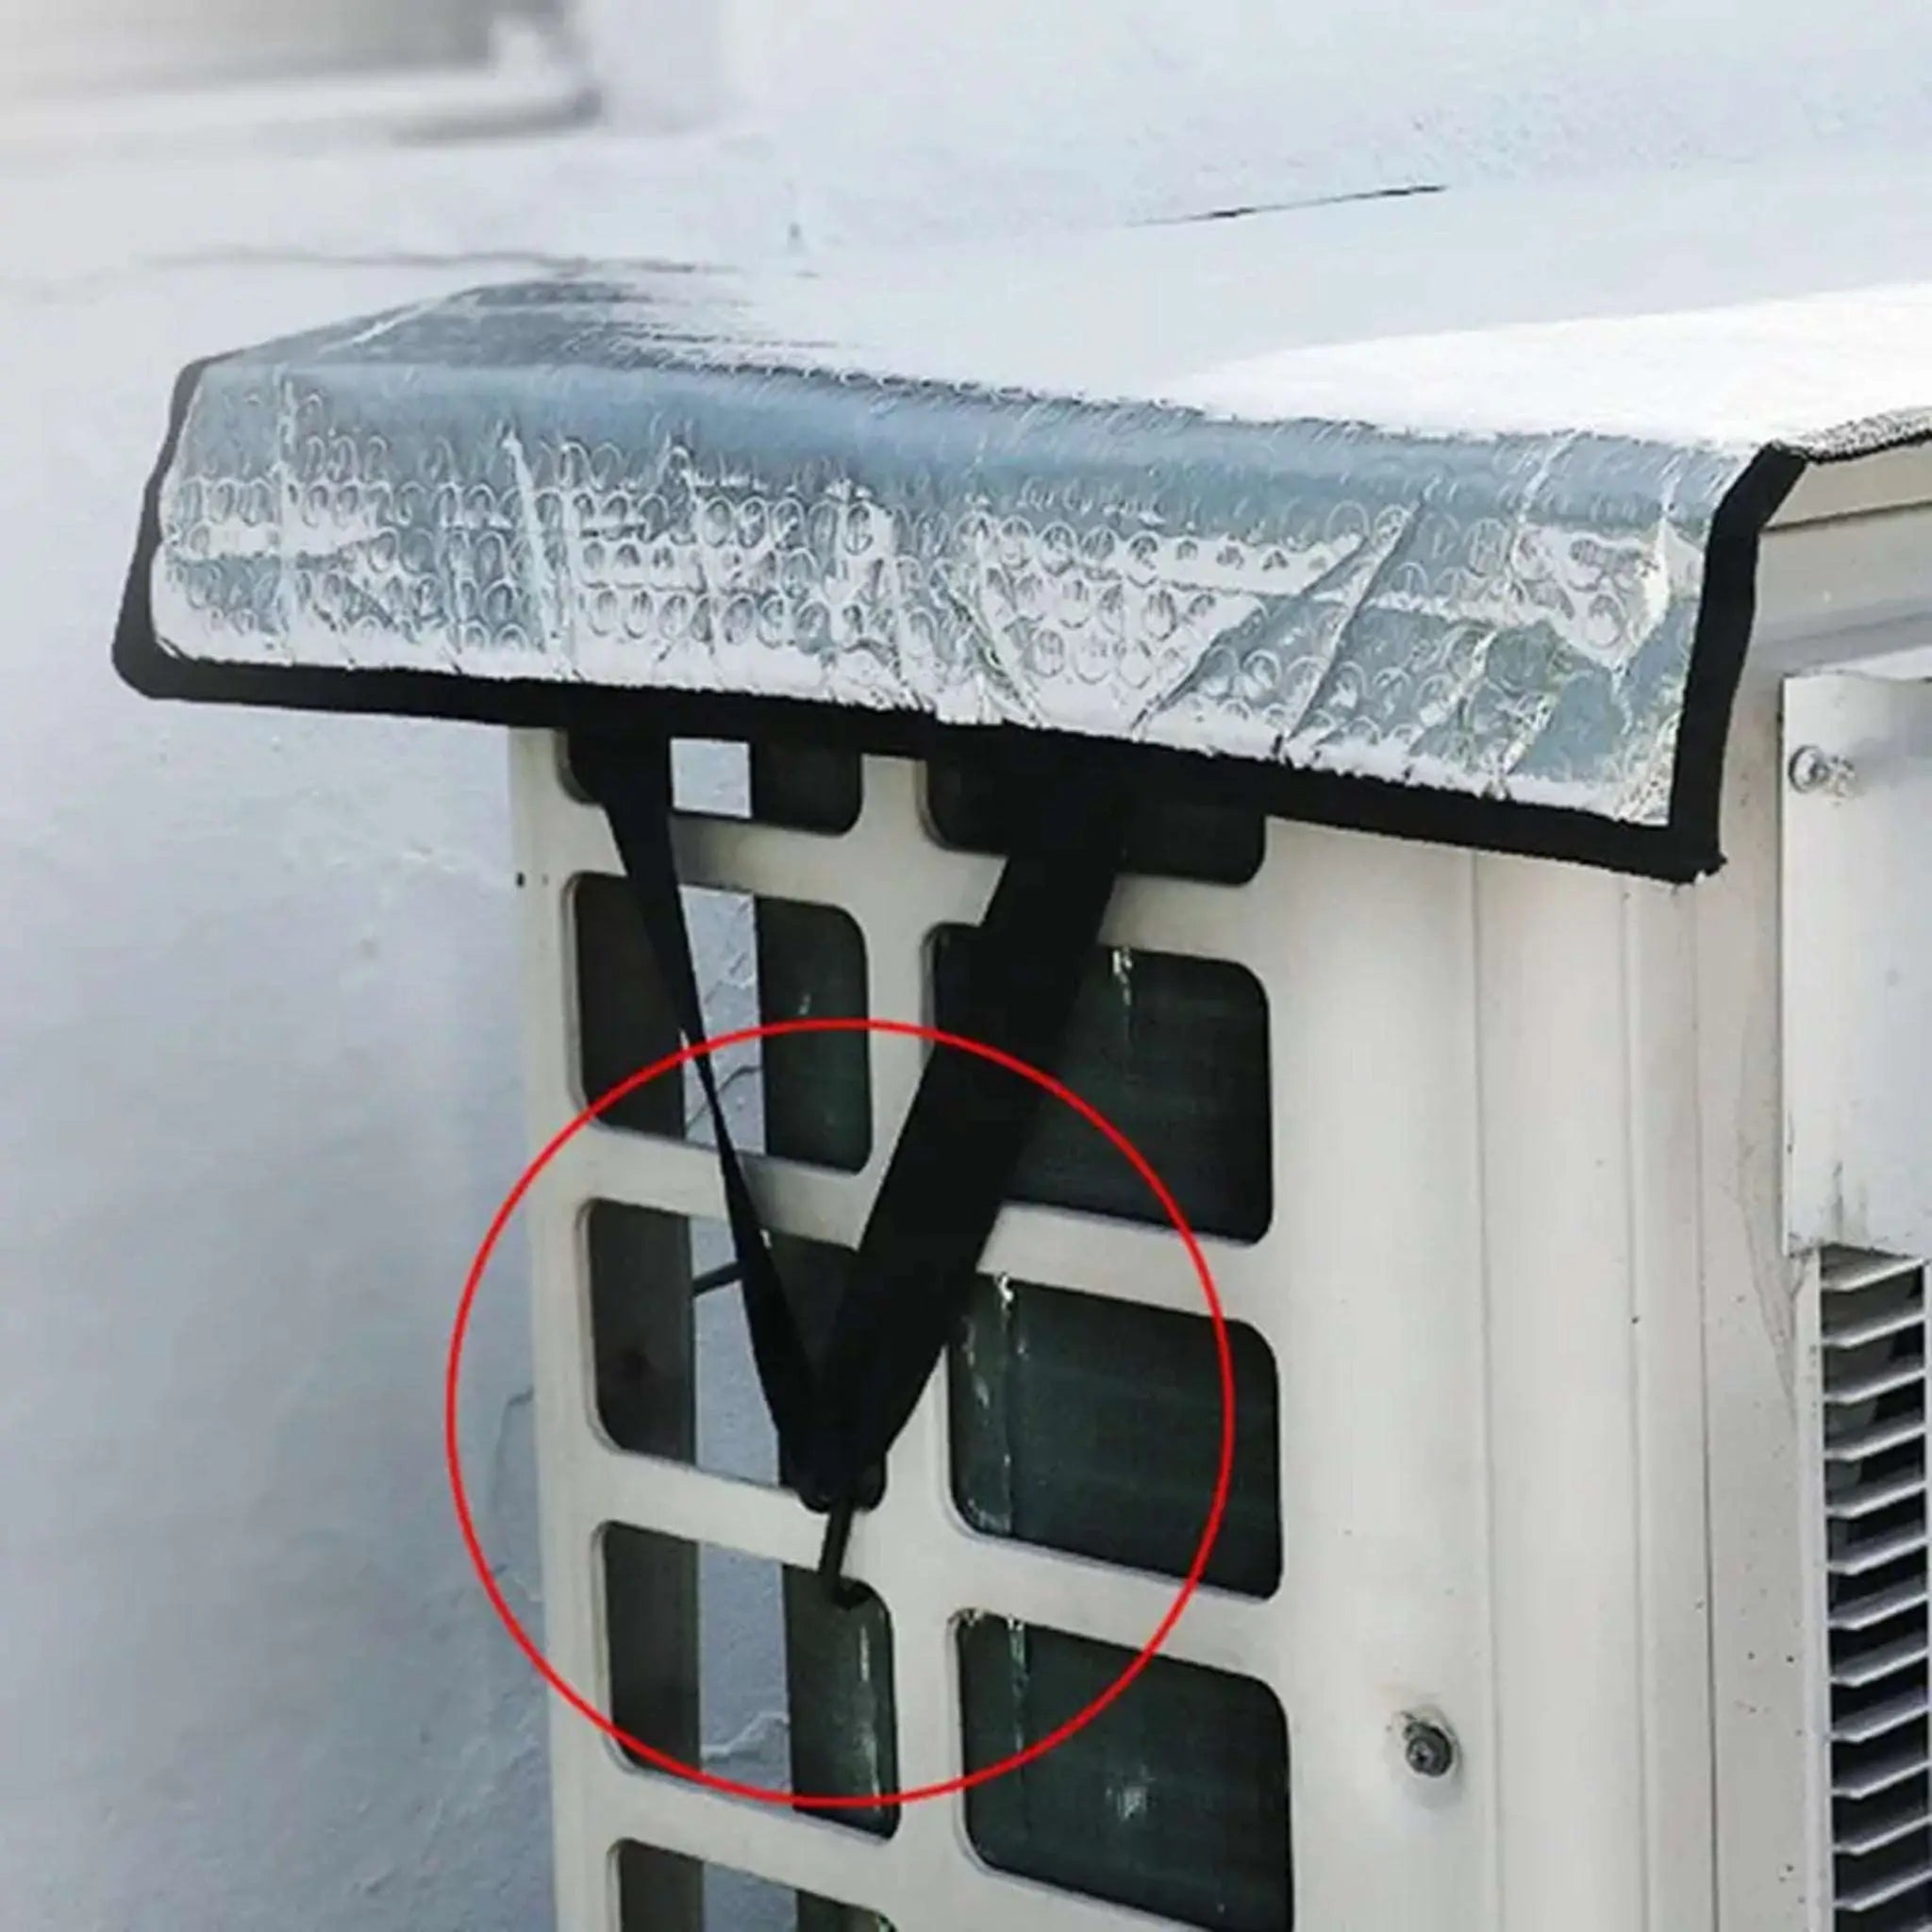 Outdoor weatherproof Air Conditioning Cover